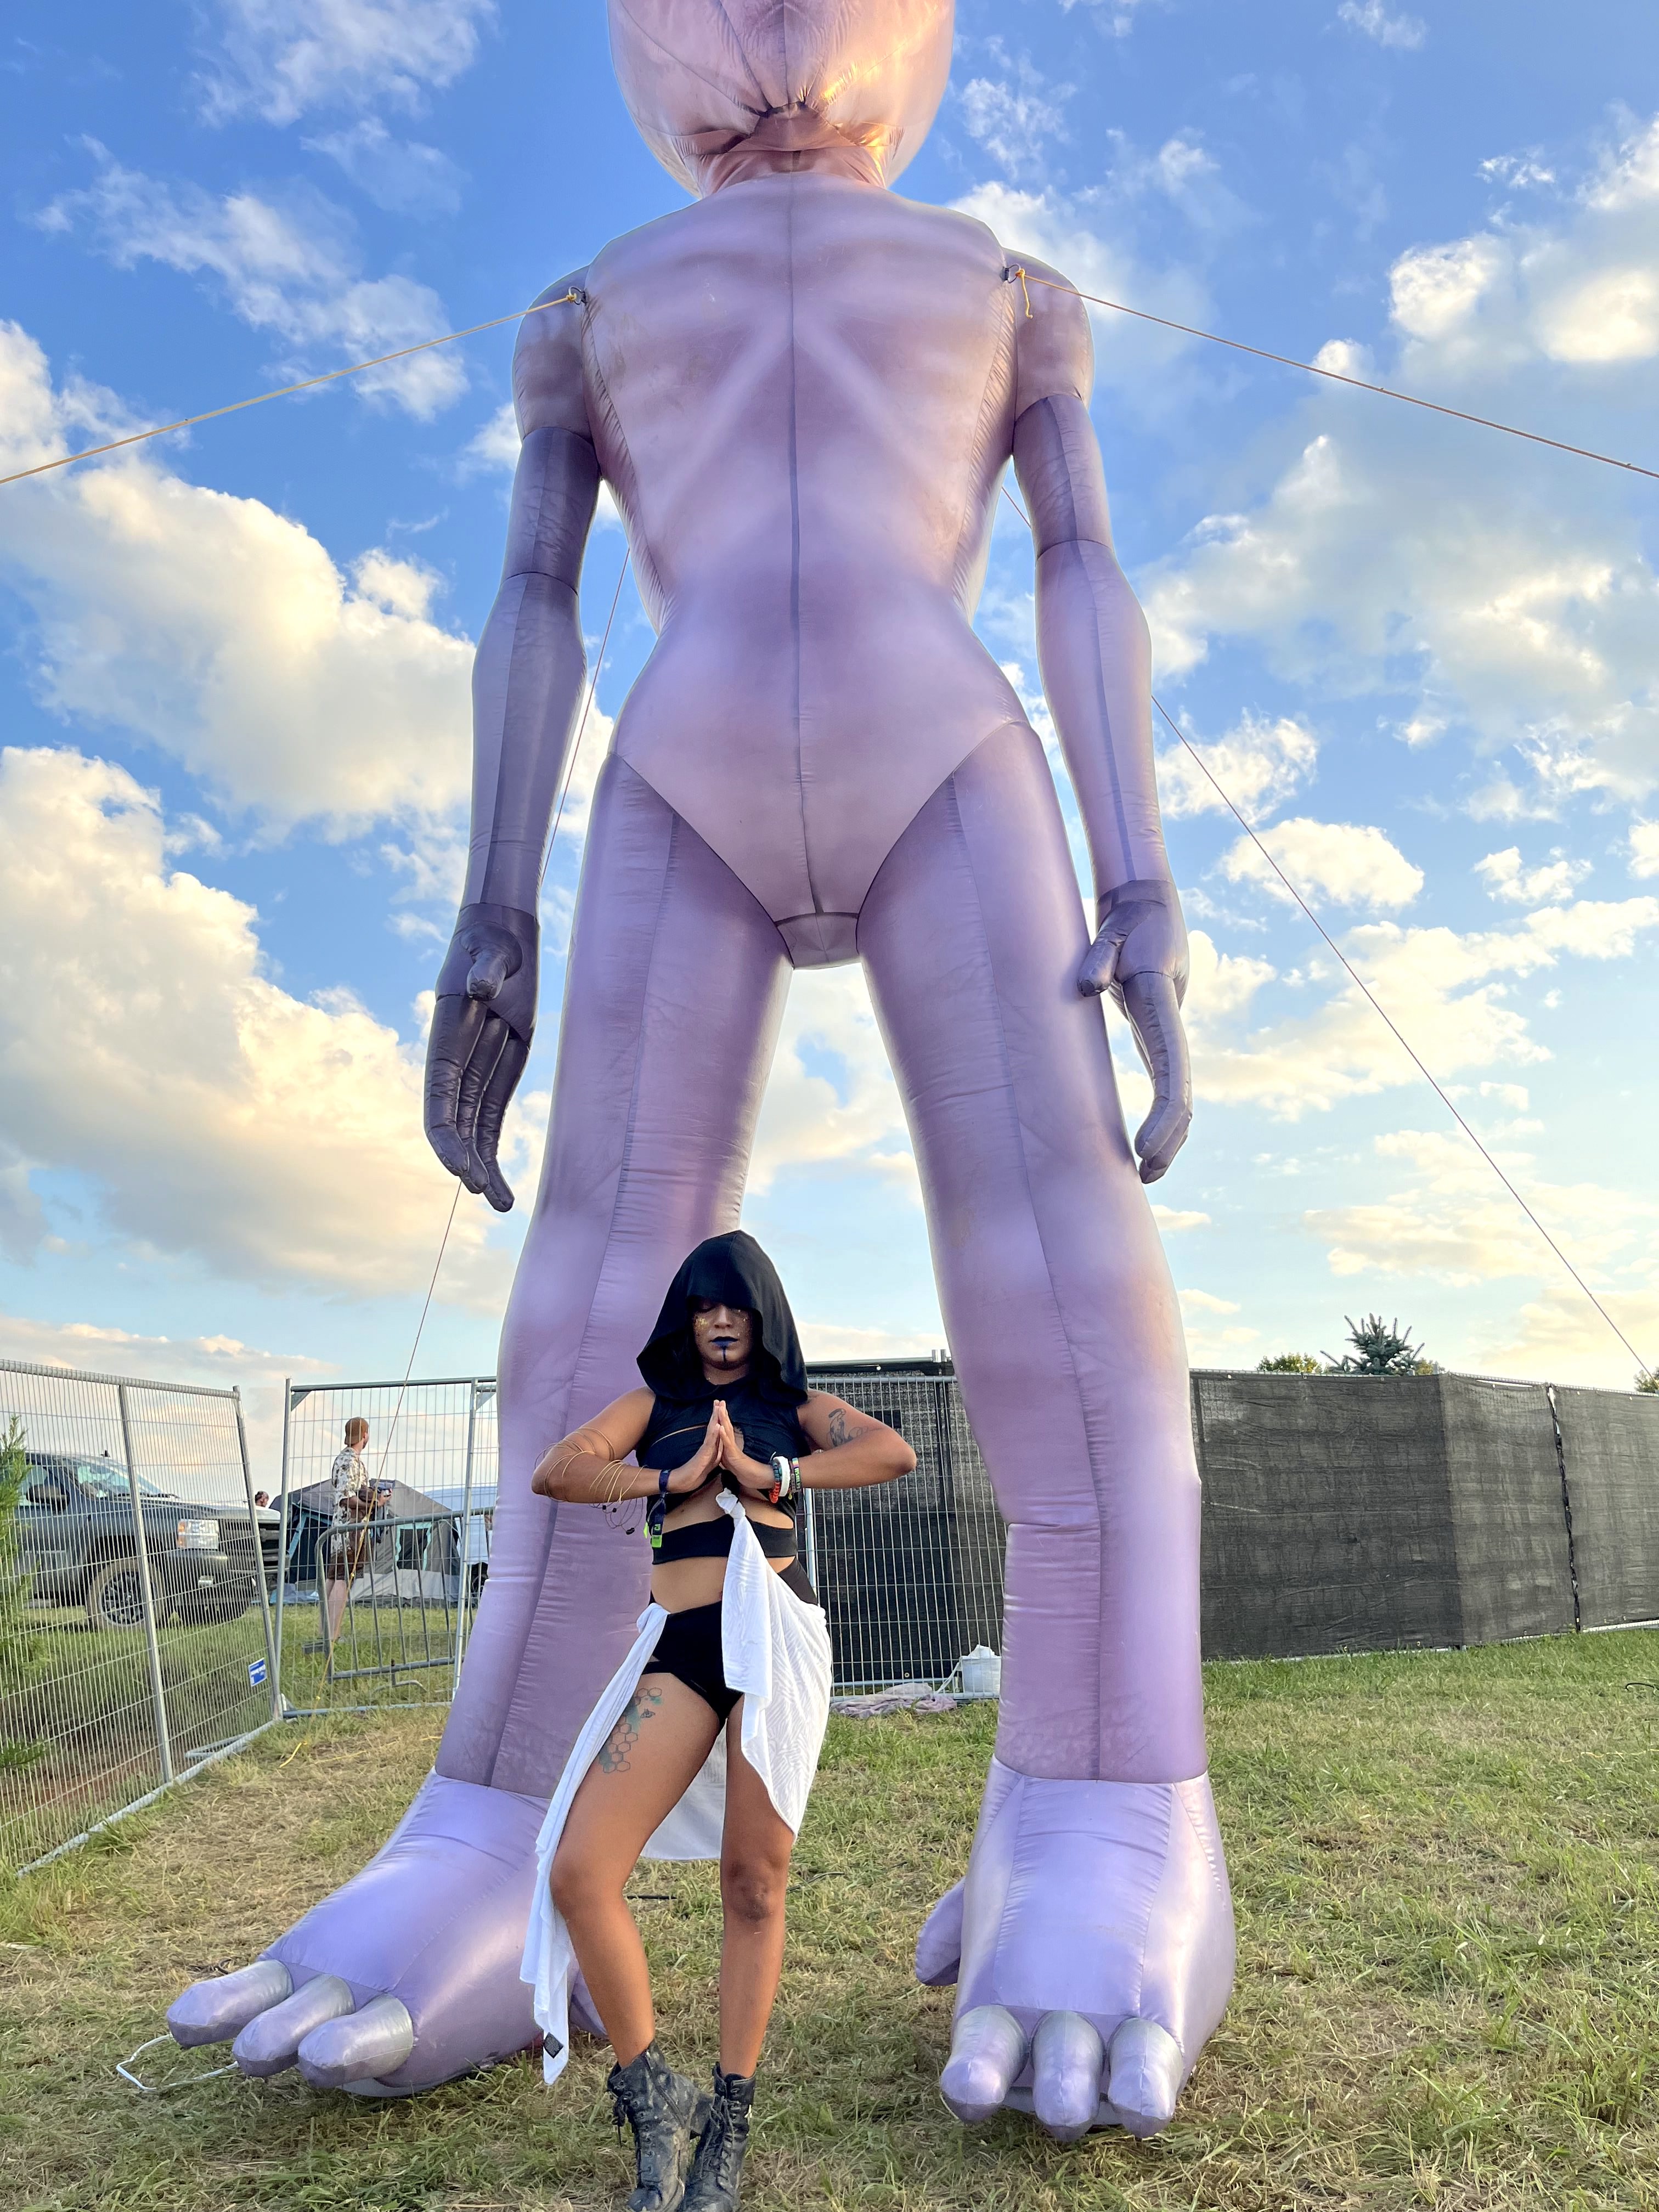 Festival fashion 2023: women wearing black hood white half-skirt in front of large purple inflatable.